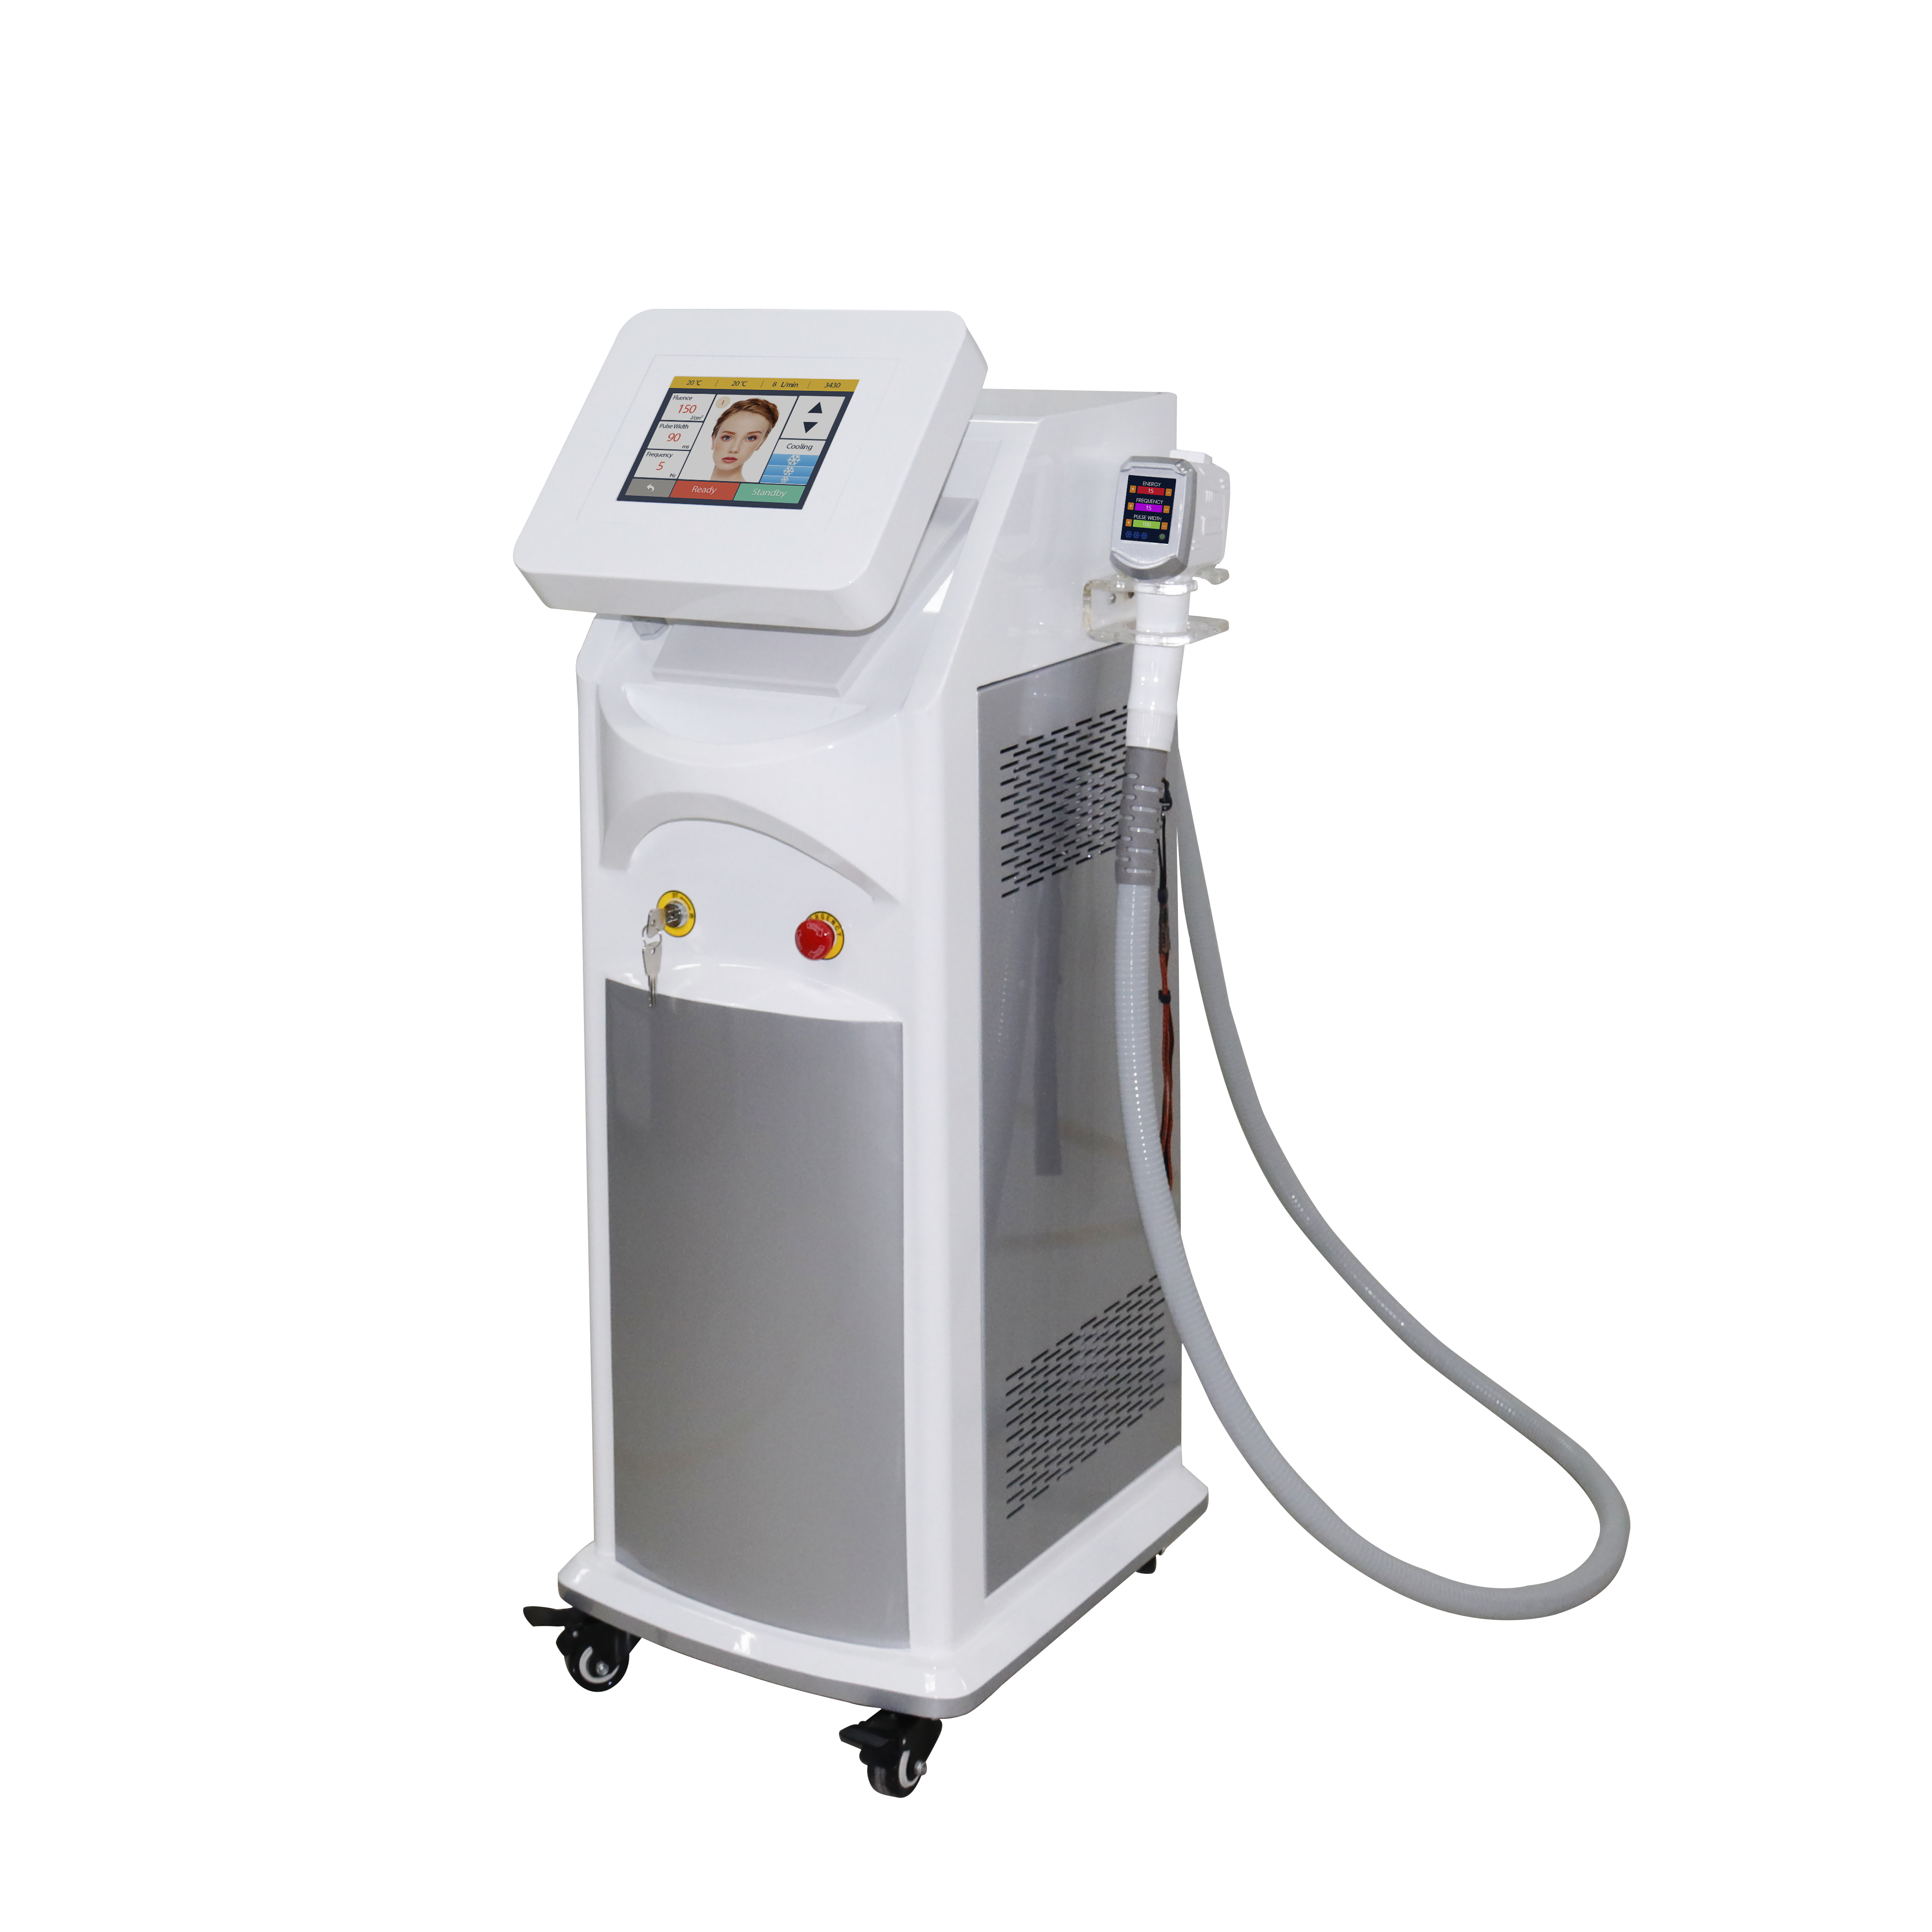 Where to buy laser hair removal machine?